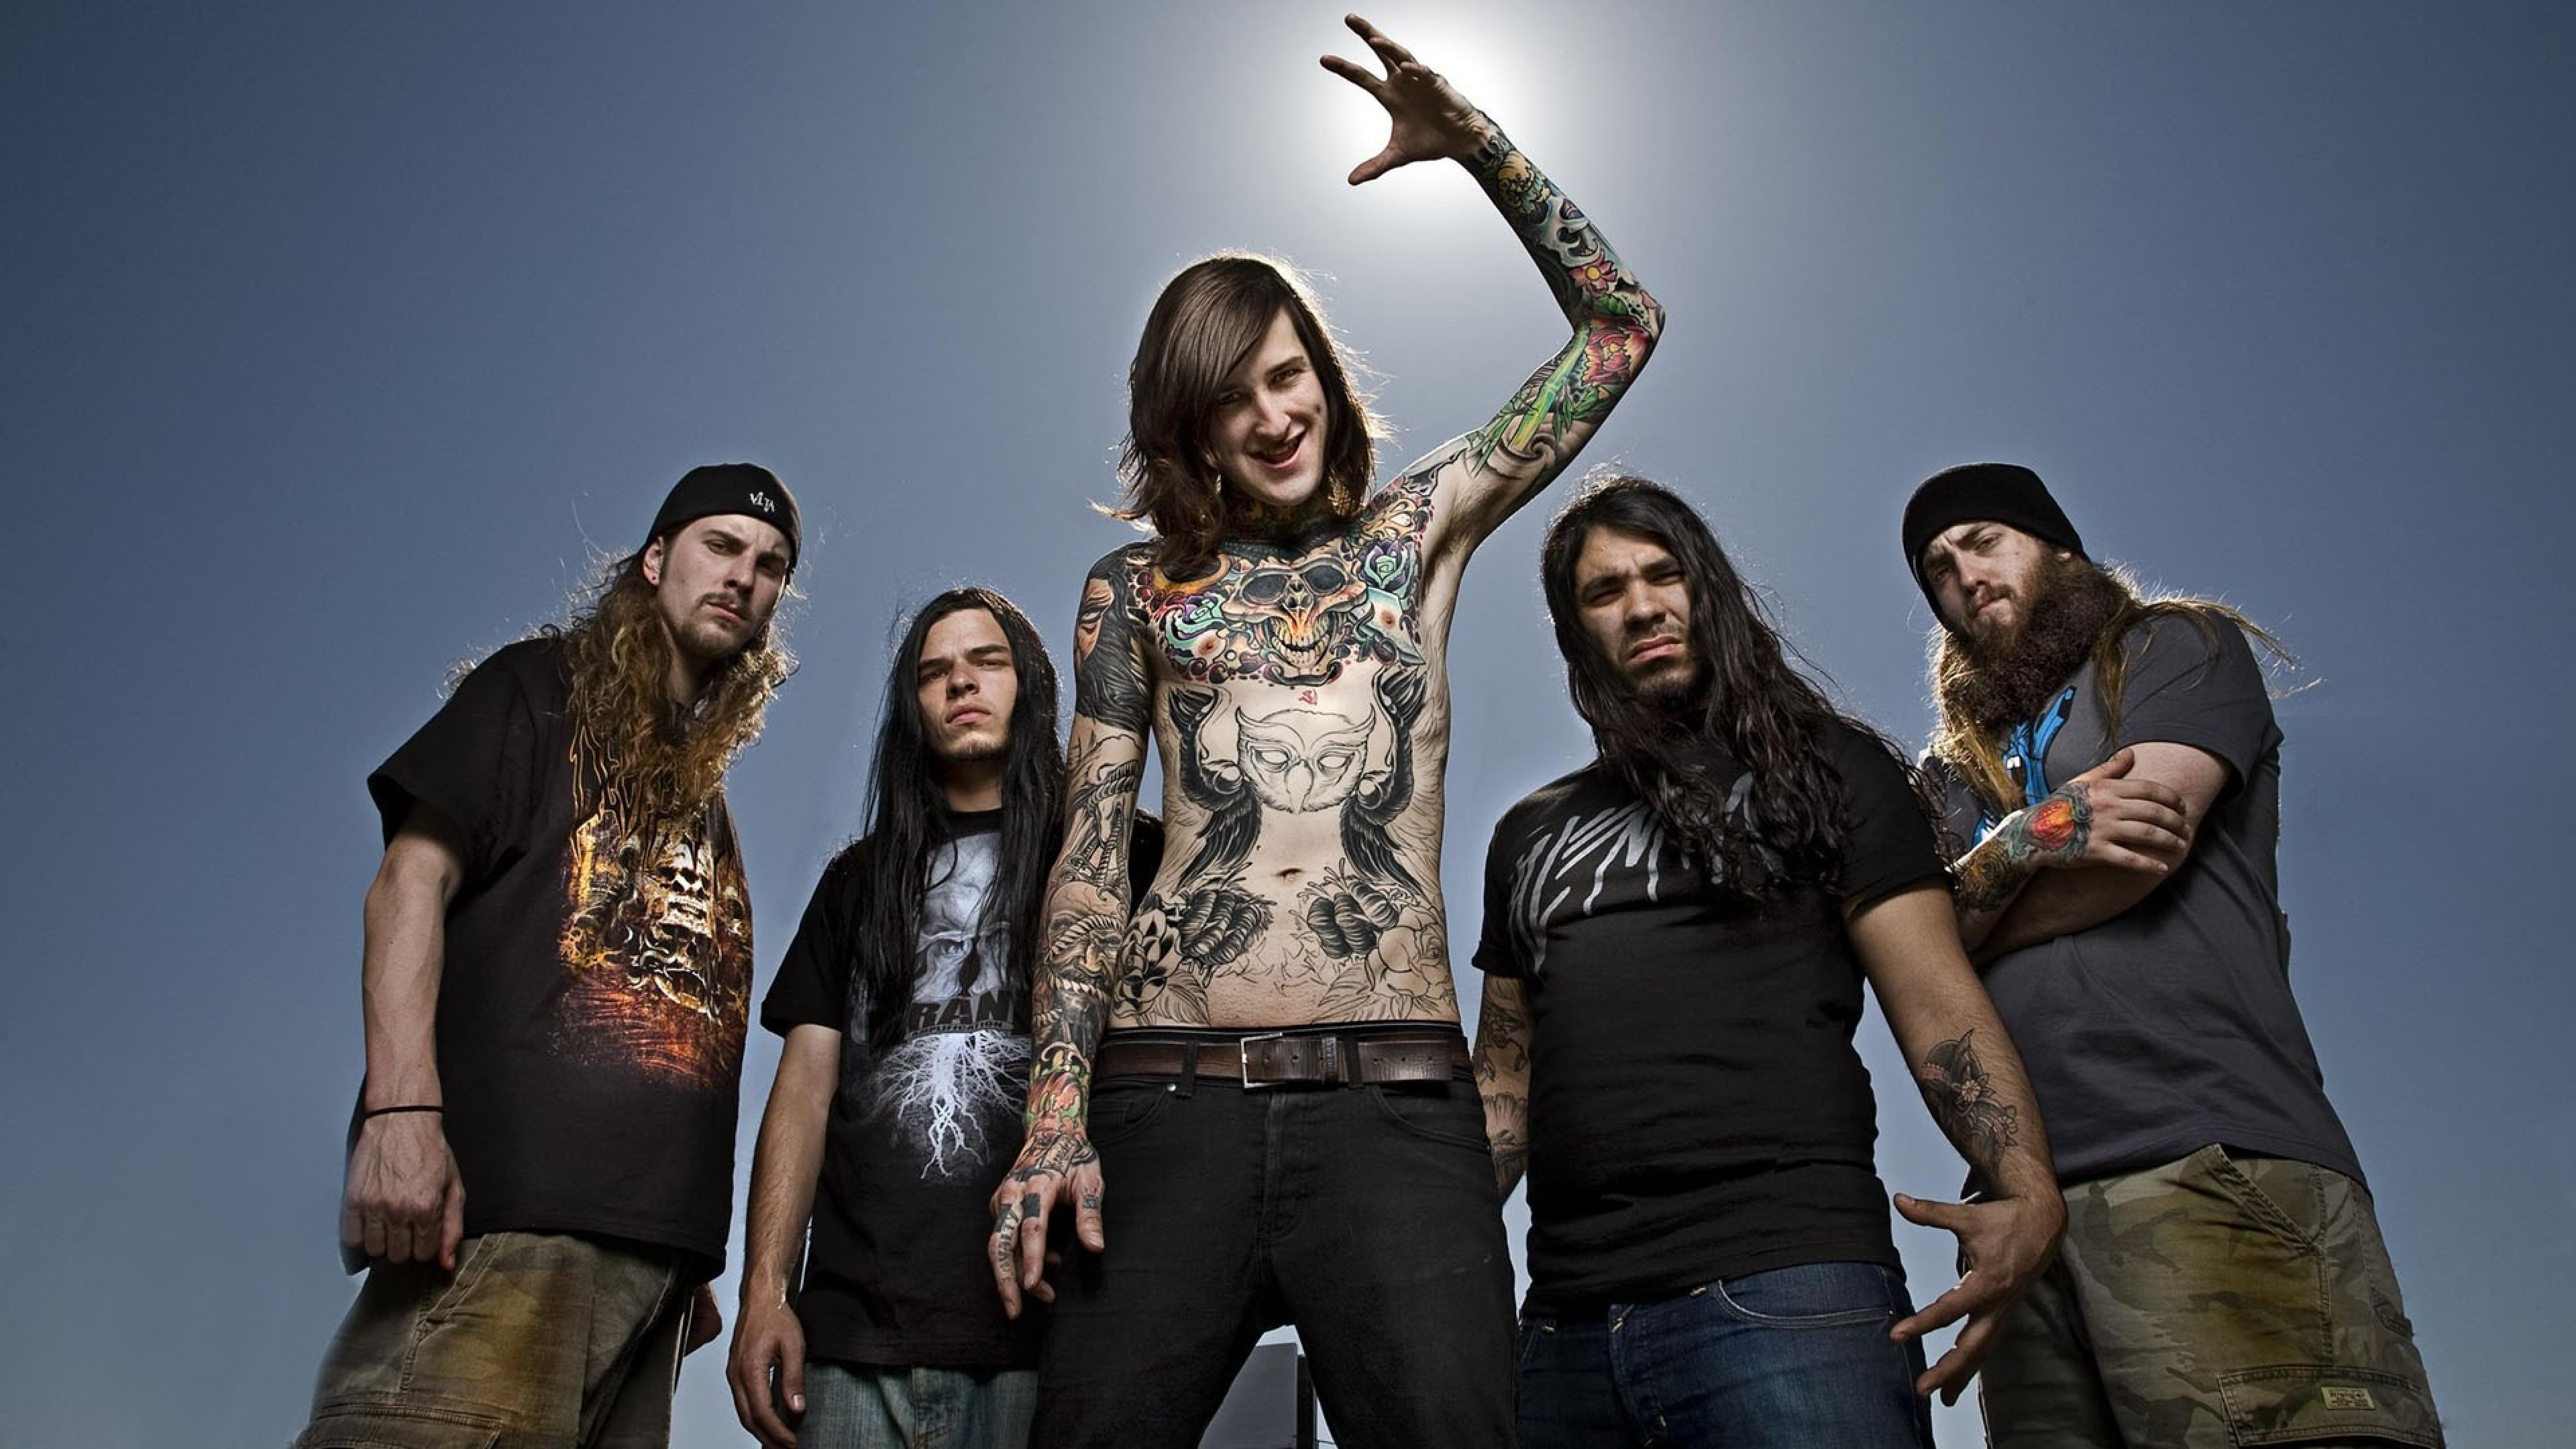 Download Wallpaper 3840x2160 Suicide silence, Tattoo, Rockers, Sky